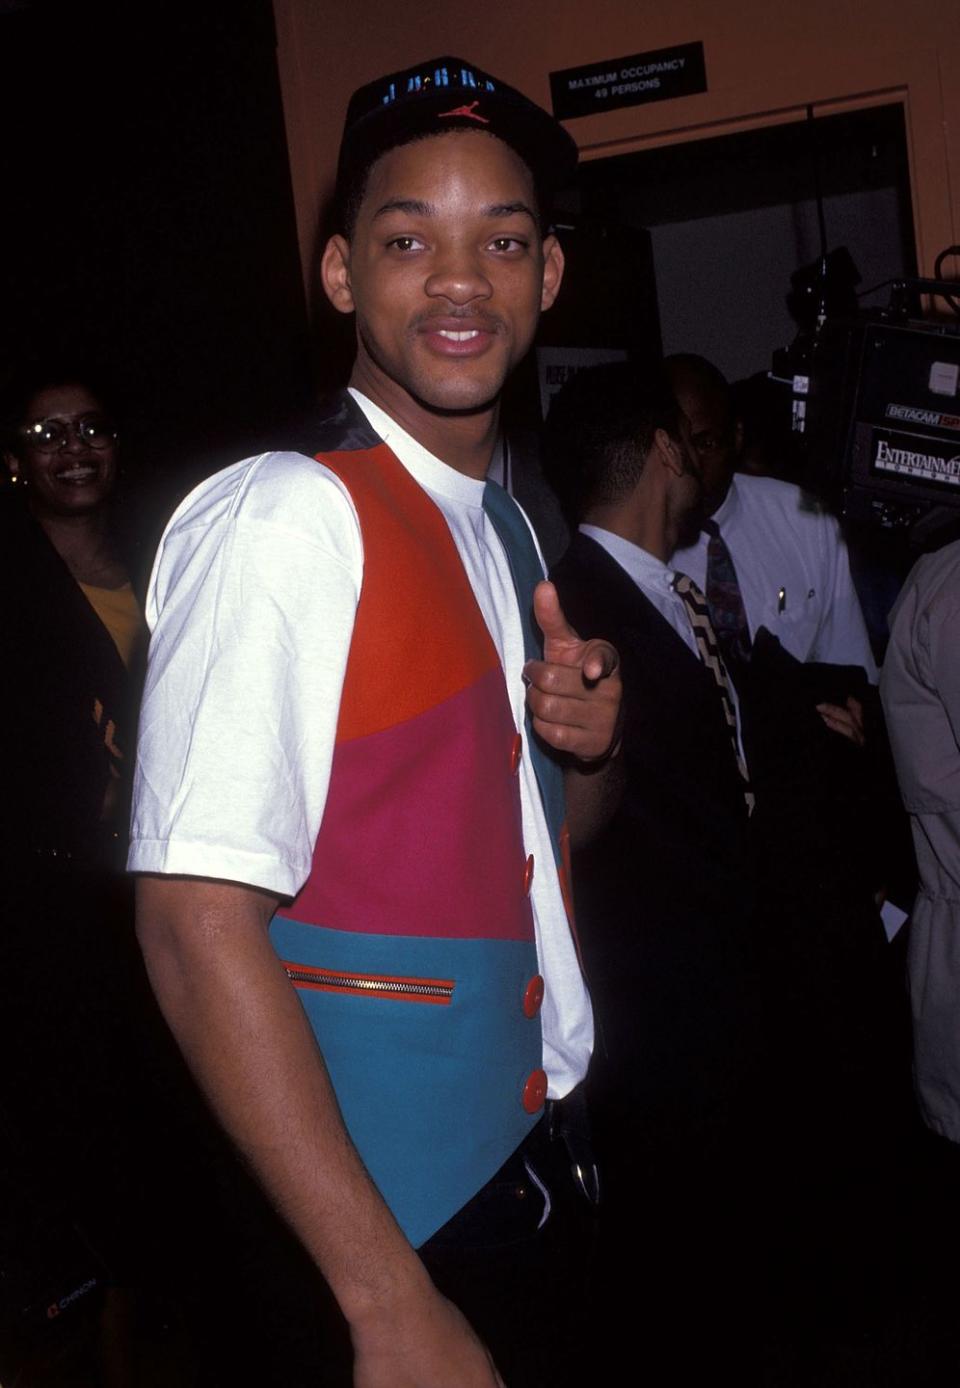 <p>Will Smith was one of the biggest stars out there during the late '80s and throughout the '90s. From his television role in <em>The Fresh Prince of Bel-Air </em>to his movie career (<em>Men In Black</em>, anyone?), to his hip-hop music legacy, Smith did it all. </p>